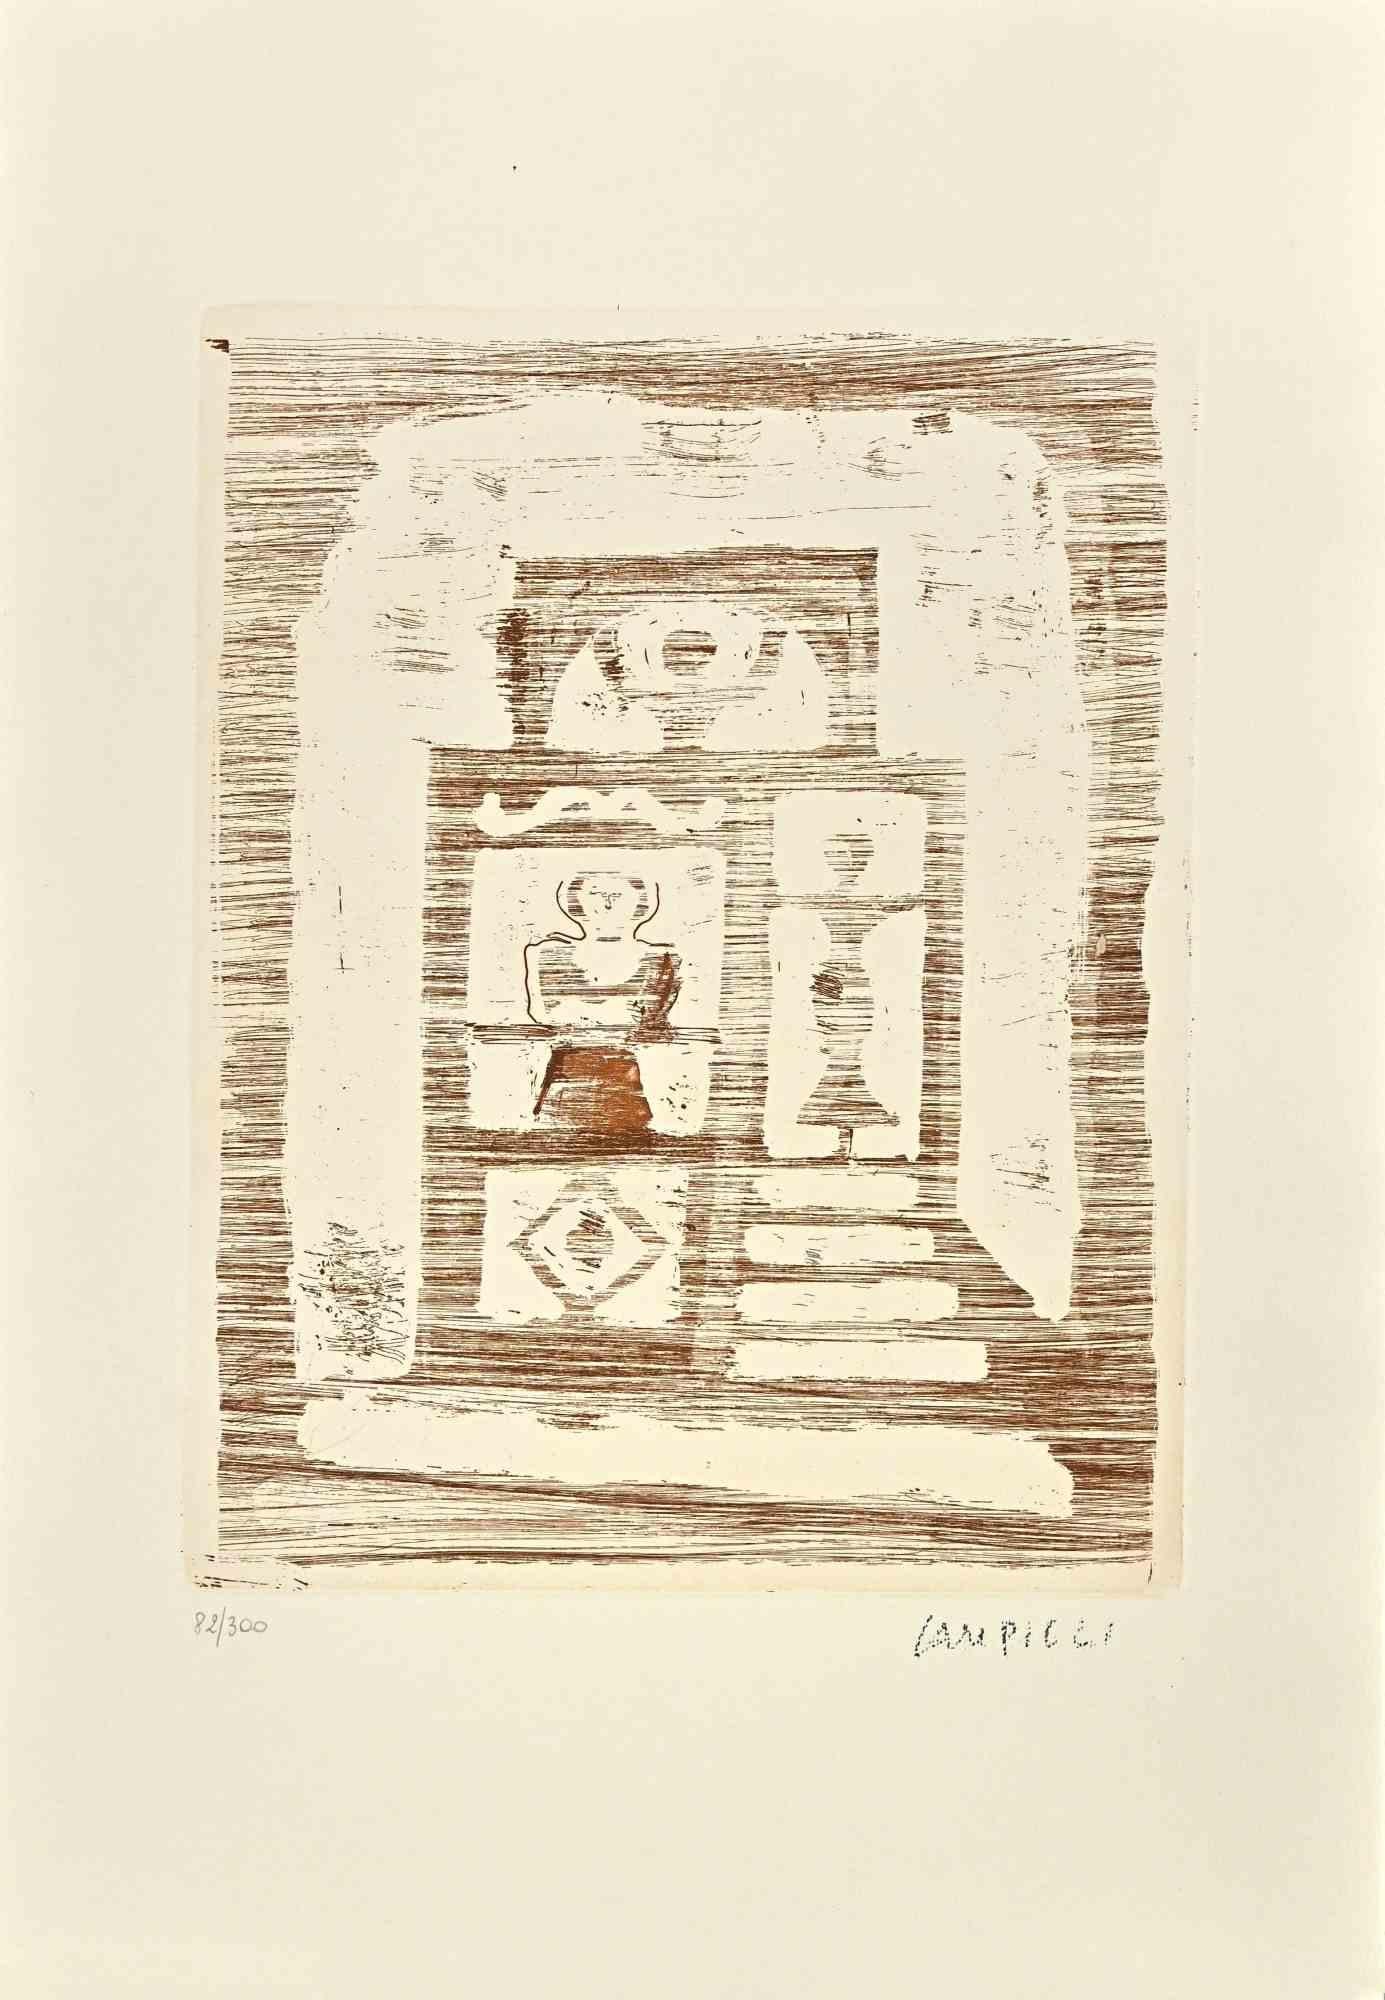 The House of Women is an original print realized by Massimo Campigli in the 1970s.

Etching on paper.

This artwork it is part of a series of works created in the last period of the artist and printed at the turn of the year of his death, which took